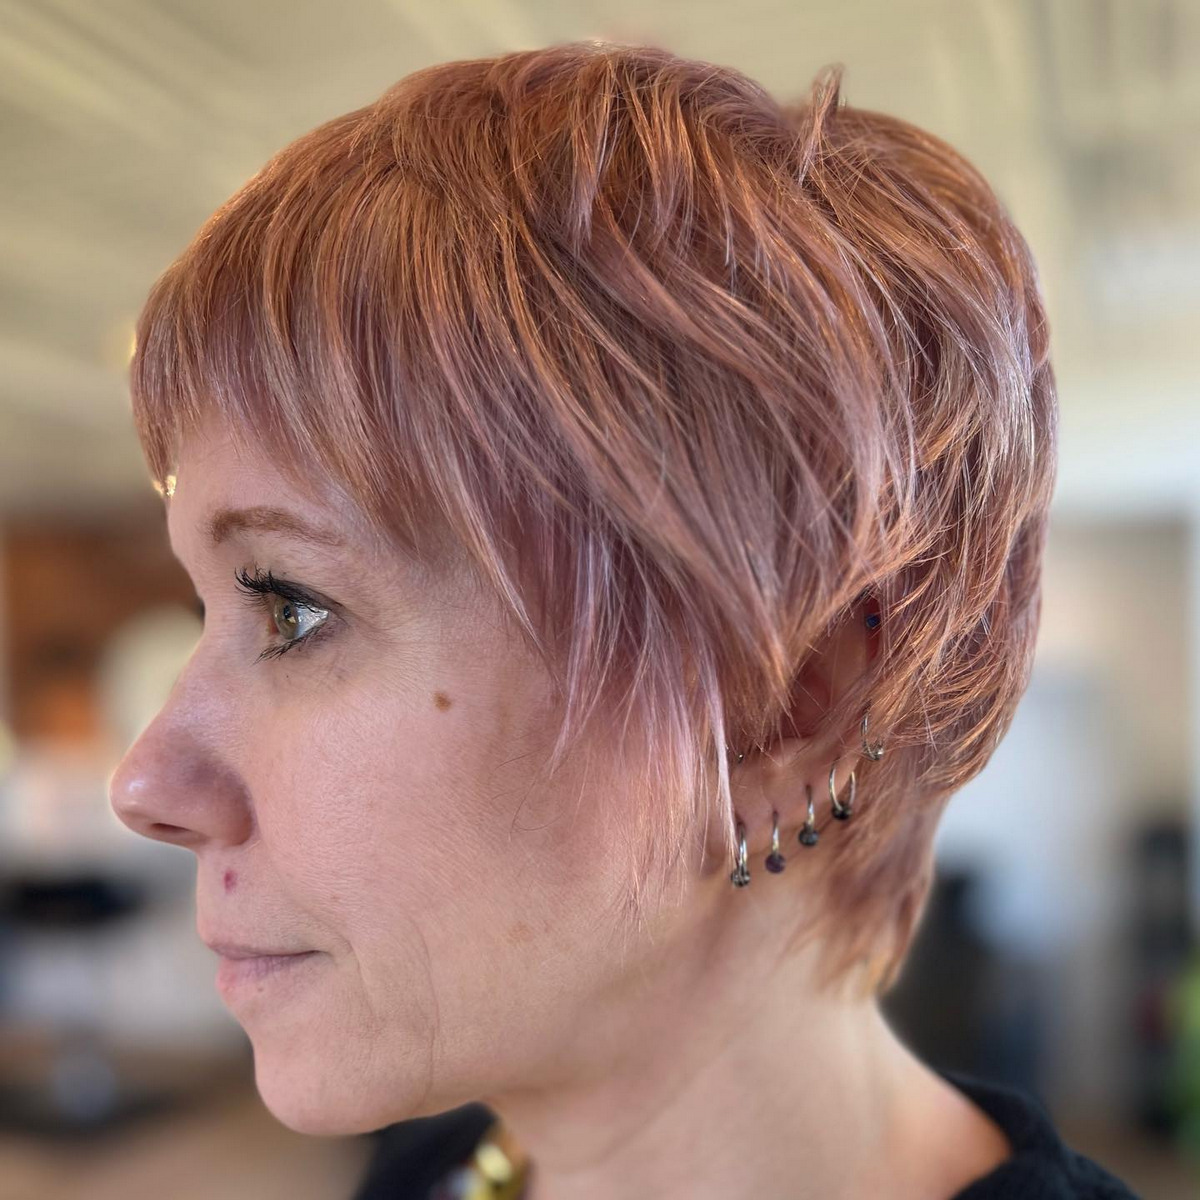 Pixie Cut With Rose Gold Color 